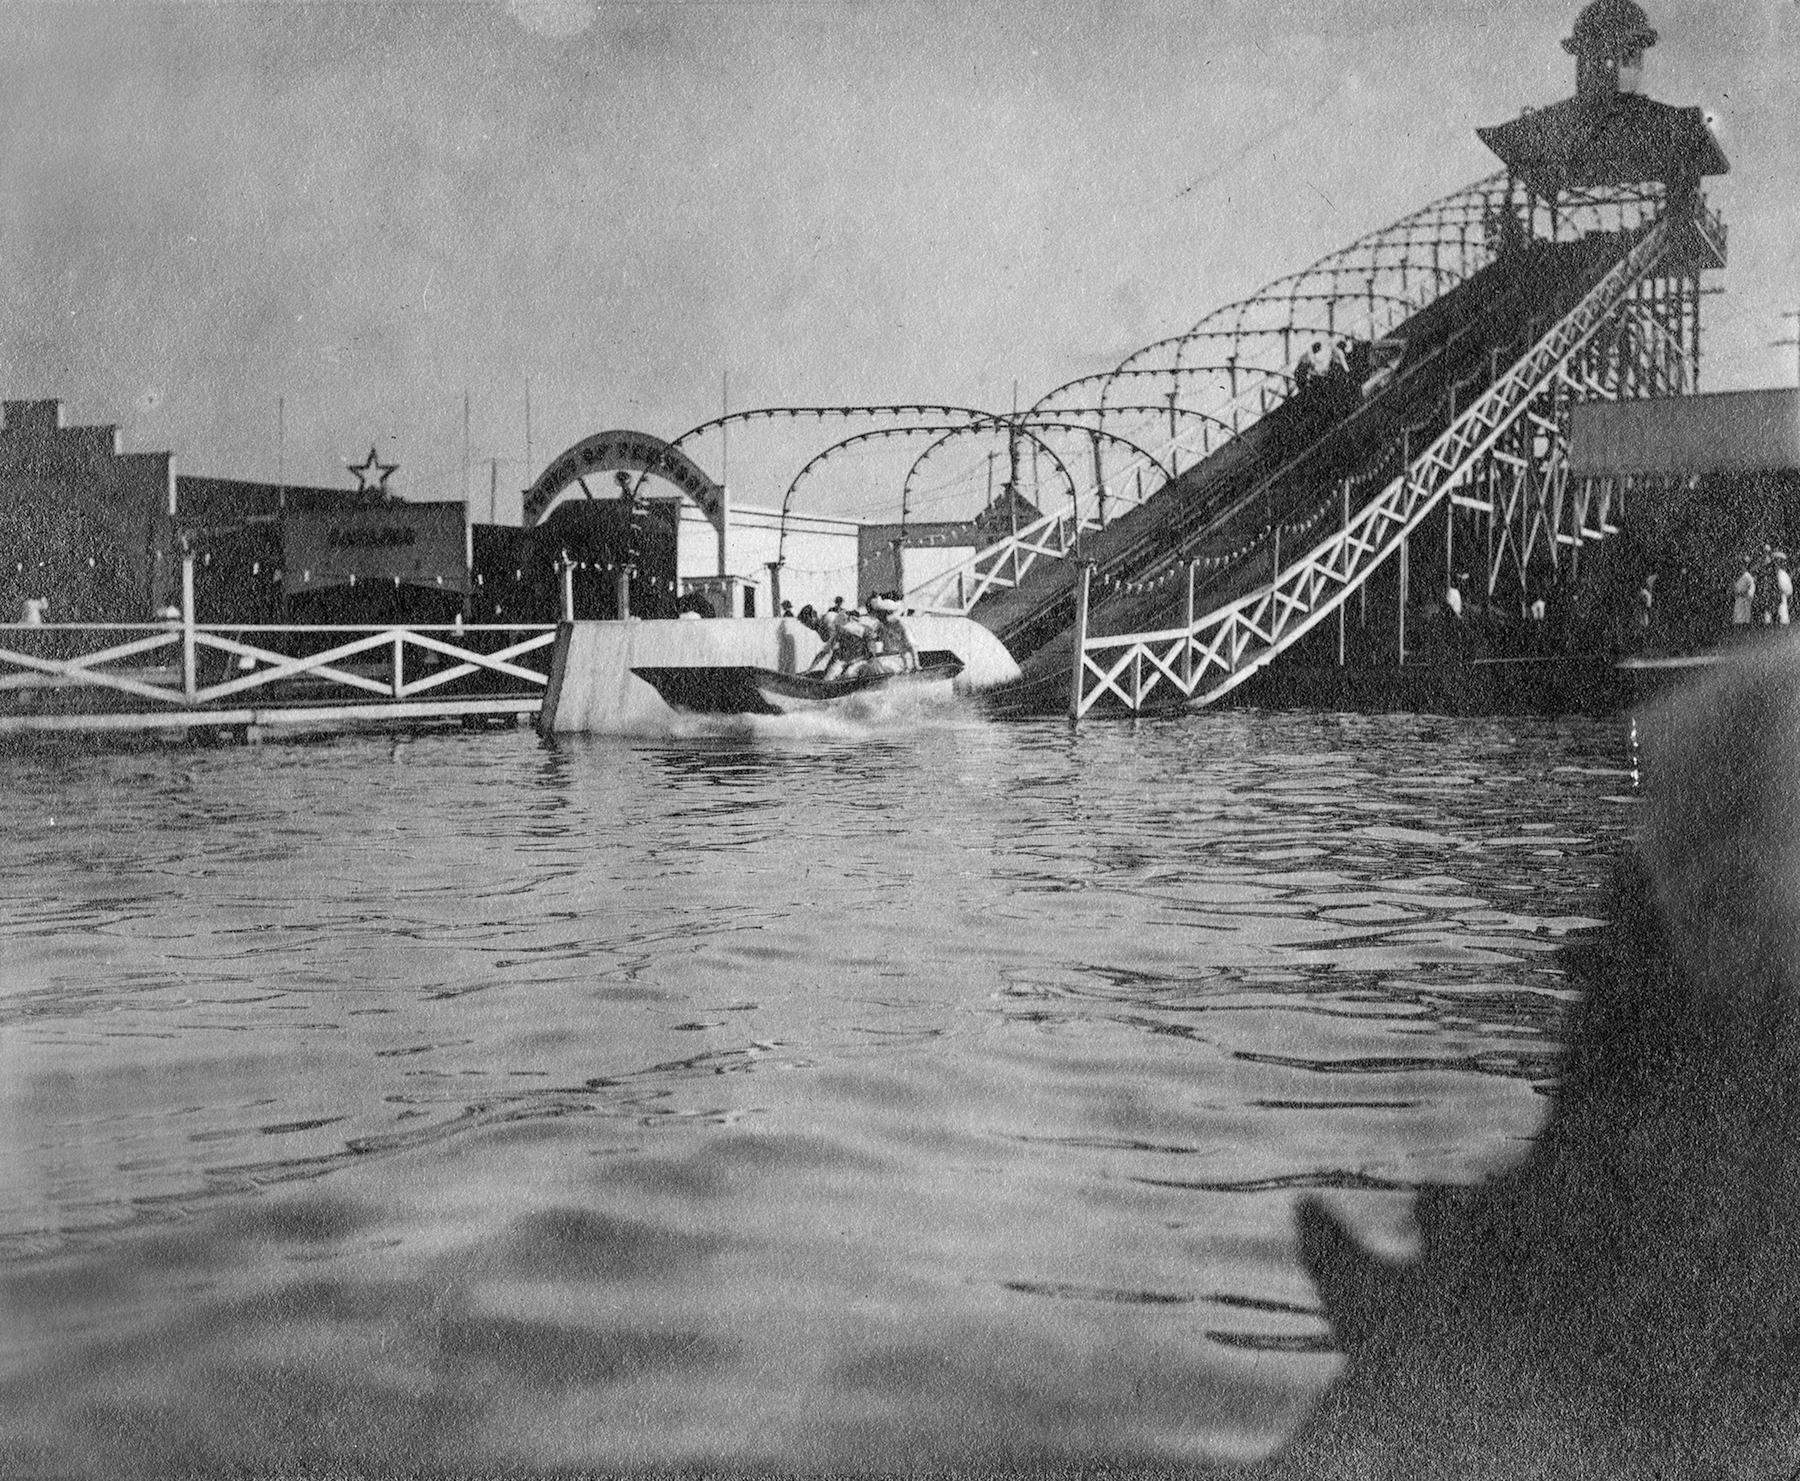 The Wonderland park in Shorewood featured a "Shoot the Chutes," an attraction where passengers rode a flat-bottomed boat down a flume into a lagoon. 